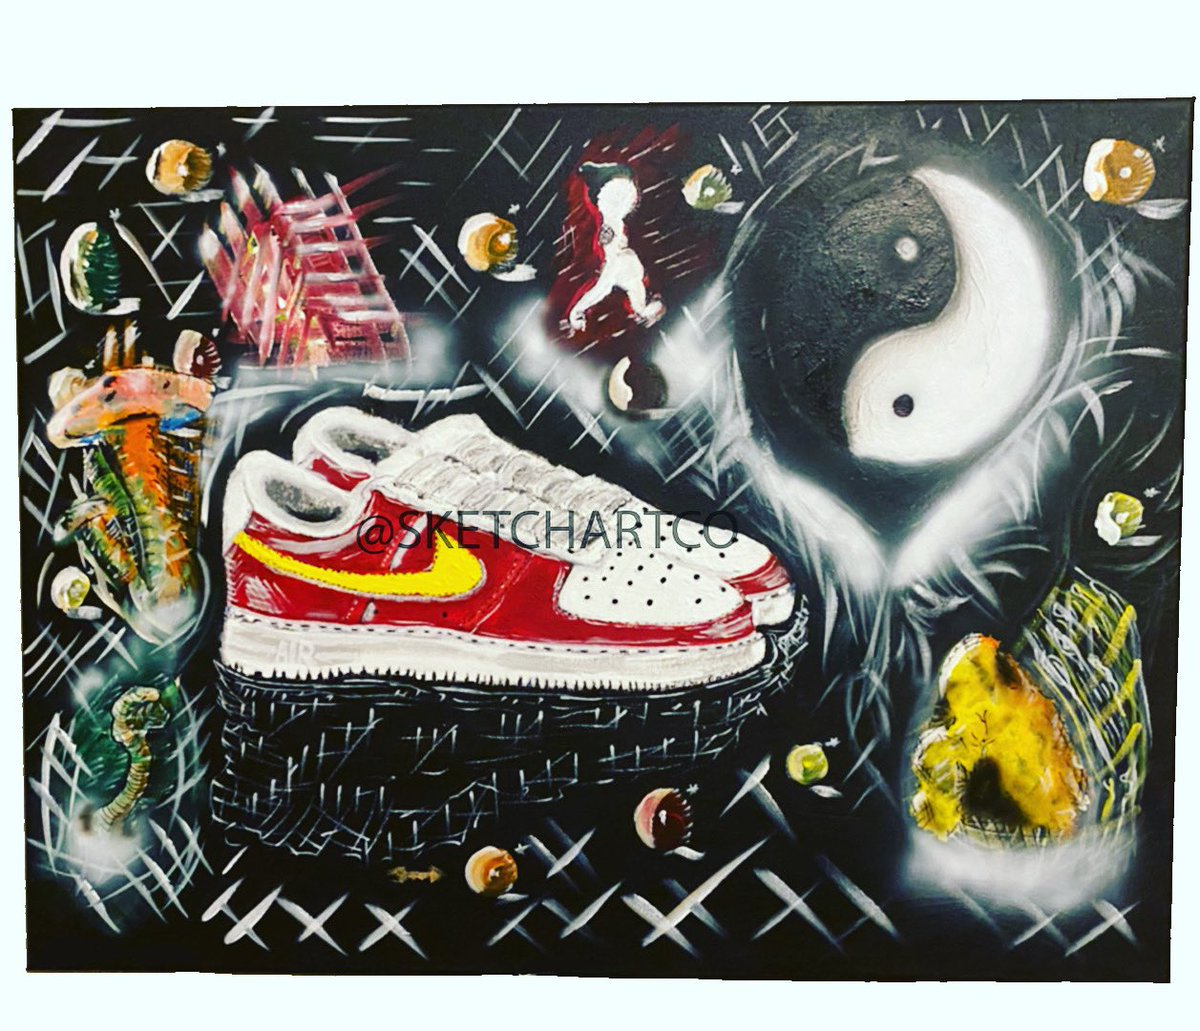 Red Air Force Ones Acrylic Original and poster prints available #hiphopartist #hiphopart #airforce1 #airforceone #airforce1custom #shoes #sneakerhead #sneakerheads #blackart #blackartist #blackartists #blackartistspace #artwork #posters #hiphopculture #hiphop #blackillustration